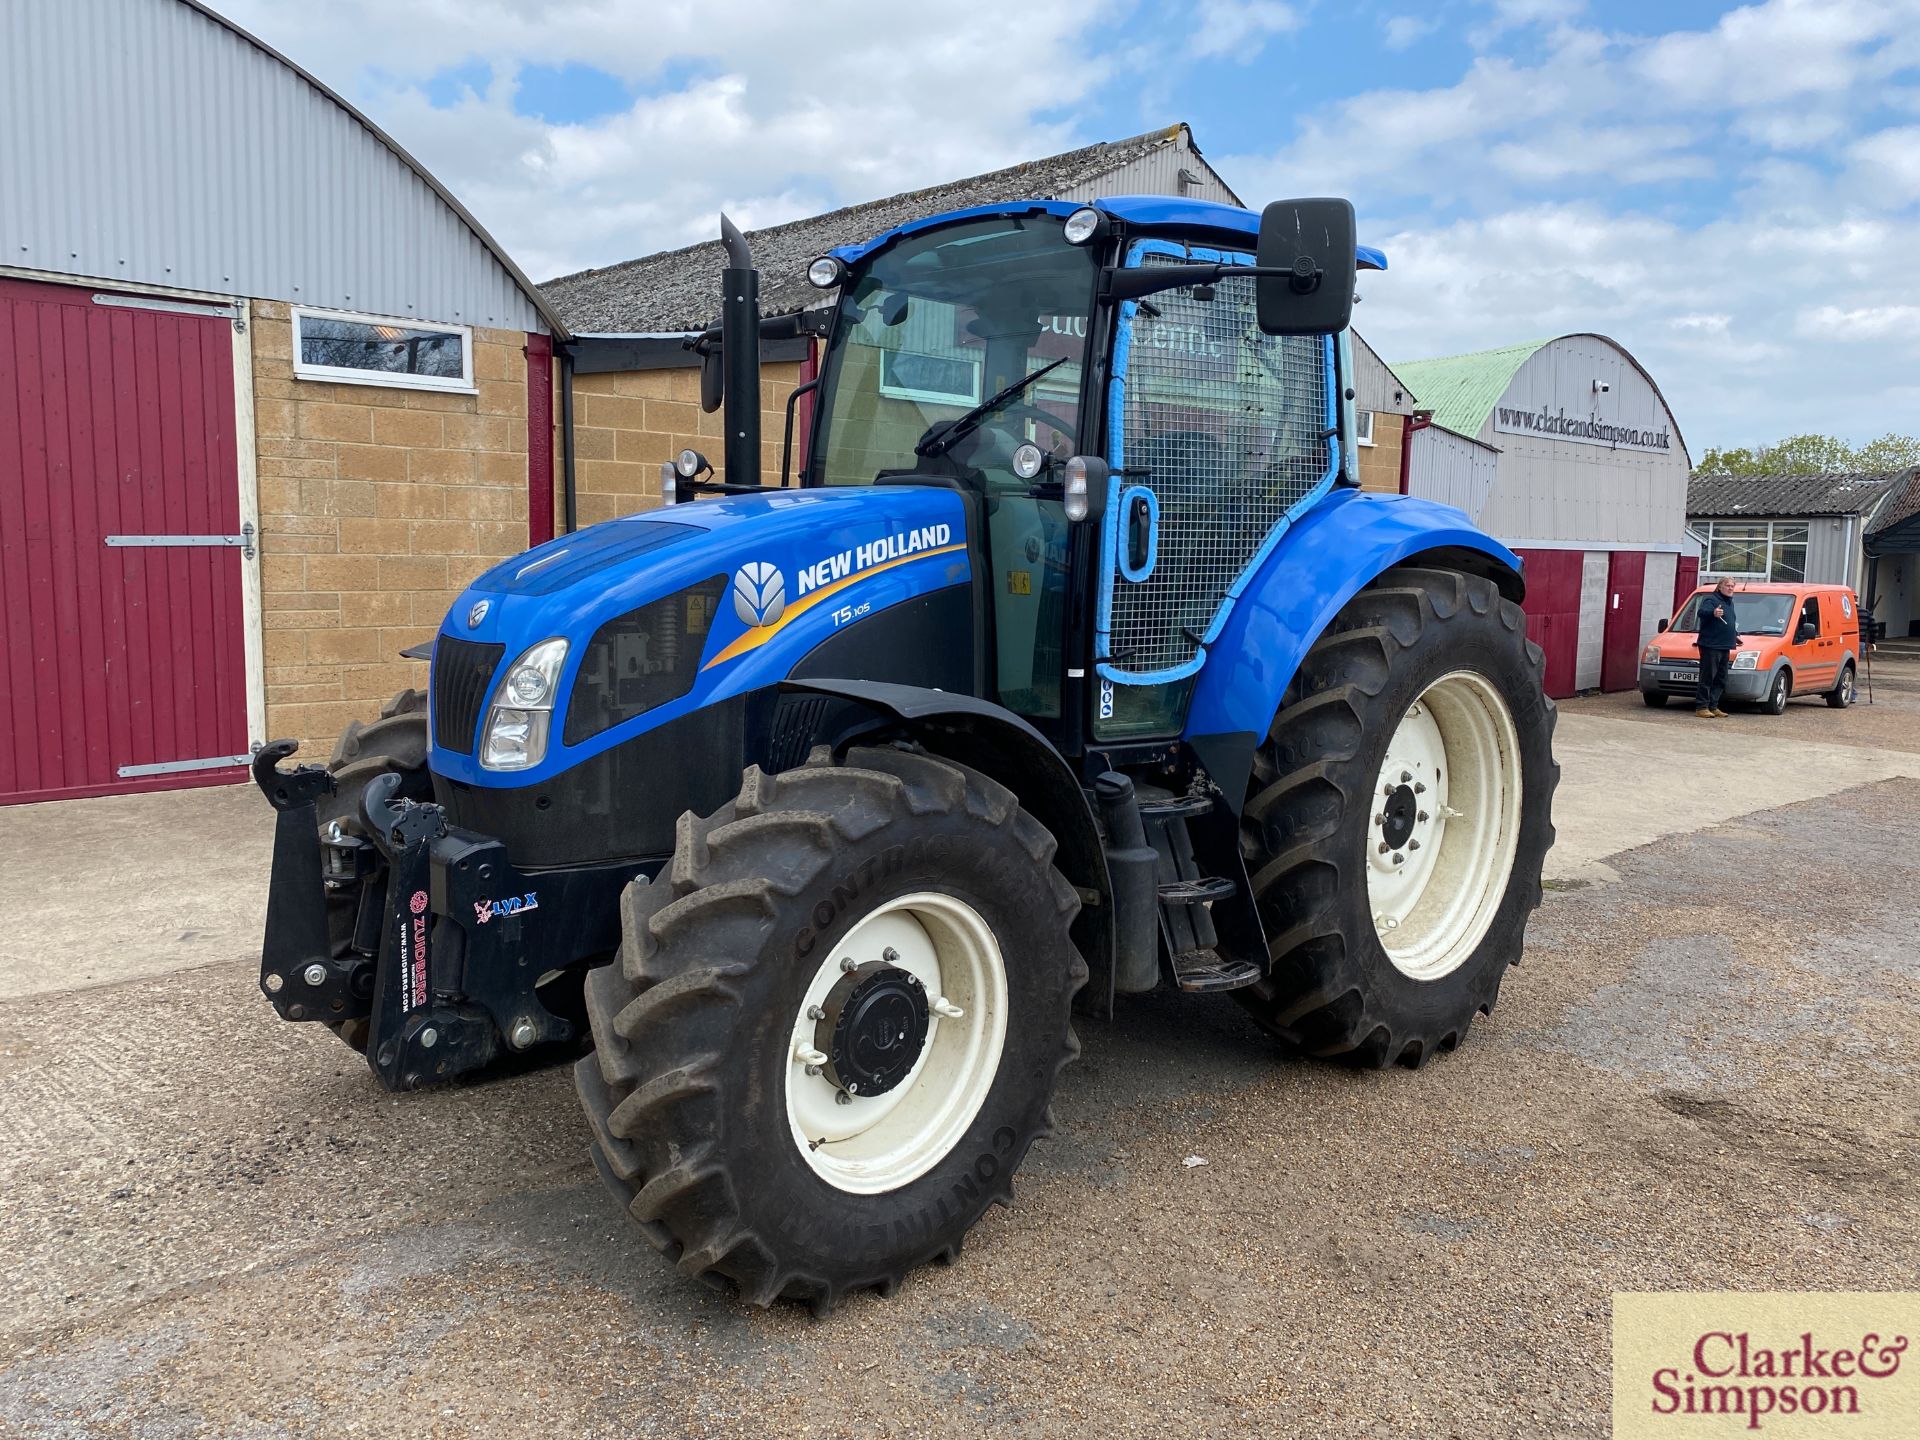 New Holland T5.105 4WD tractor. Registration EU15 AFN. Date of first registration 03/2015. Serial